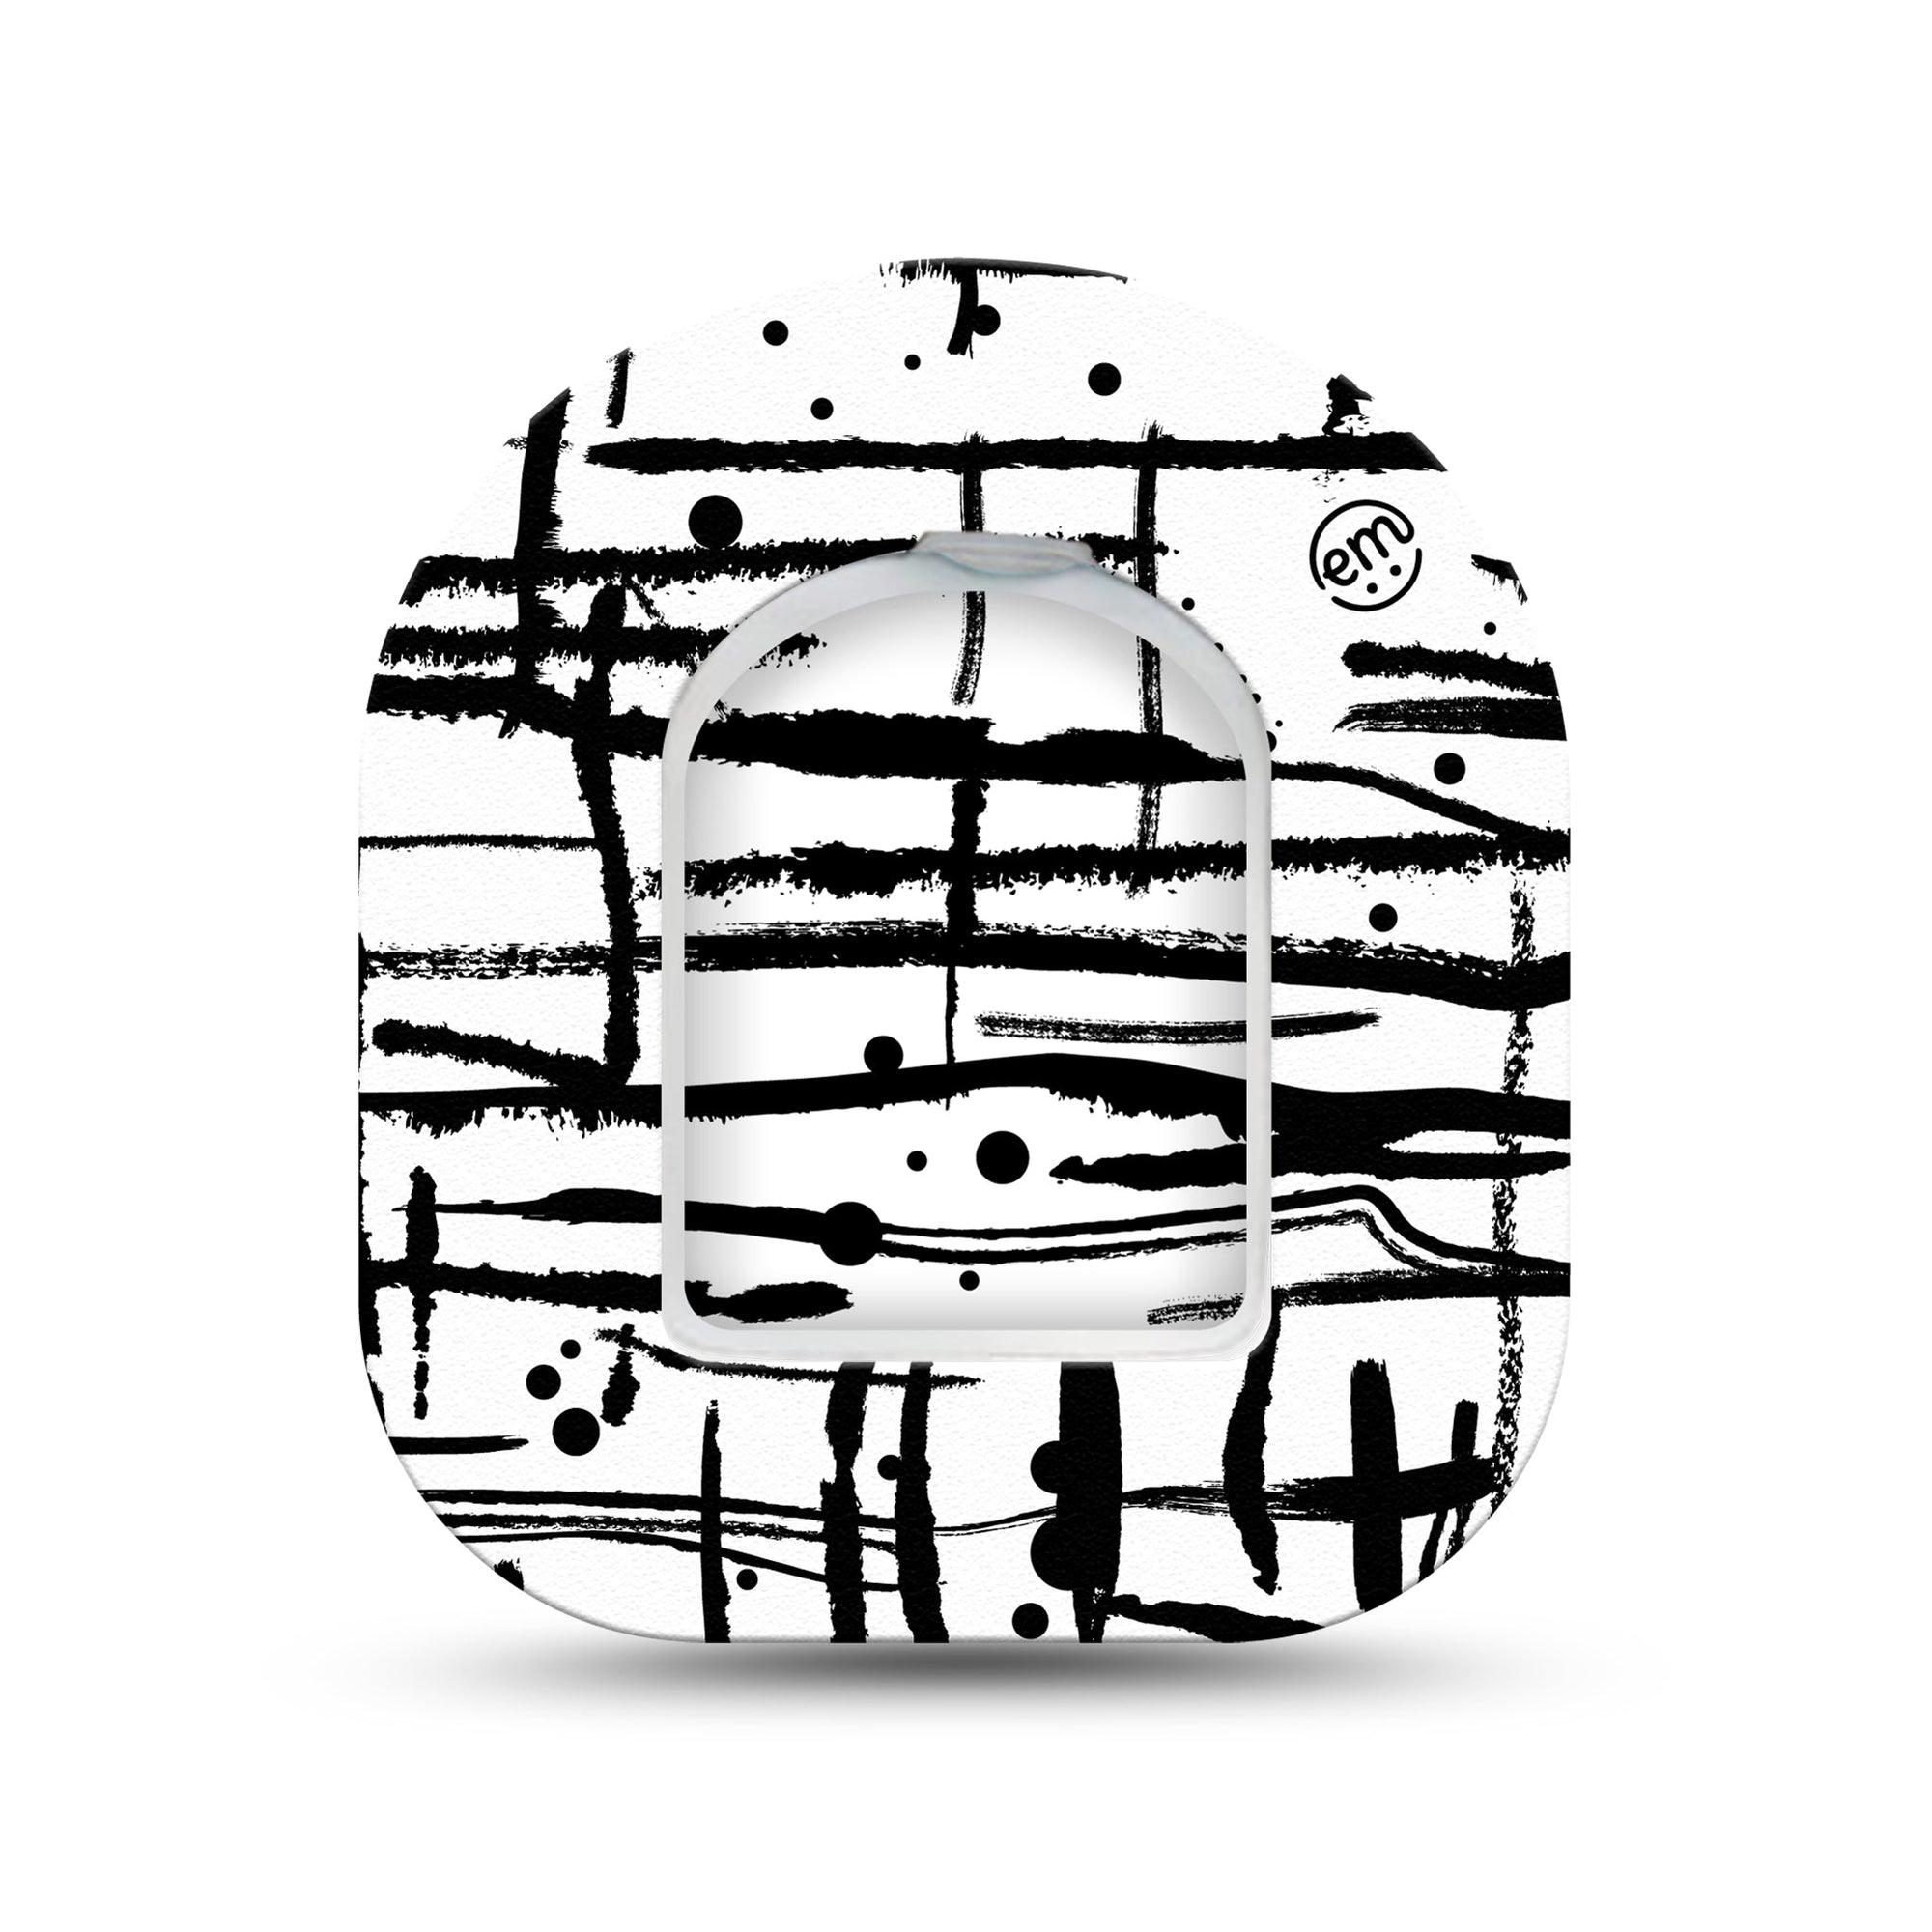 ExpressionMed B&W Drip Omnipod Surface Center Sticker and Mini Tape Black Dripped and Splattered Paint Vinyl Sticker and Tape Design Pump Design